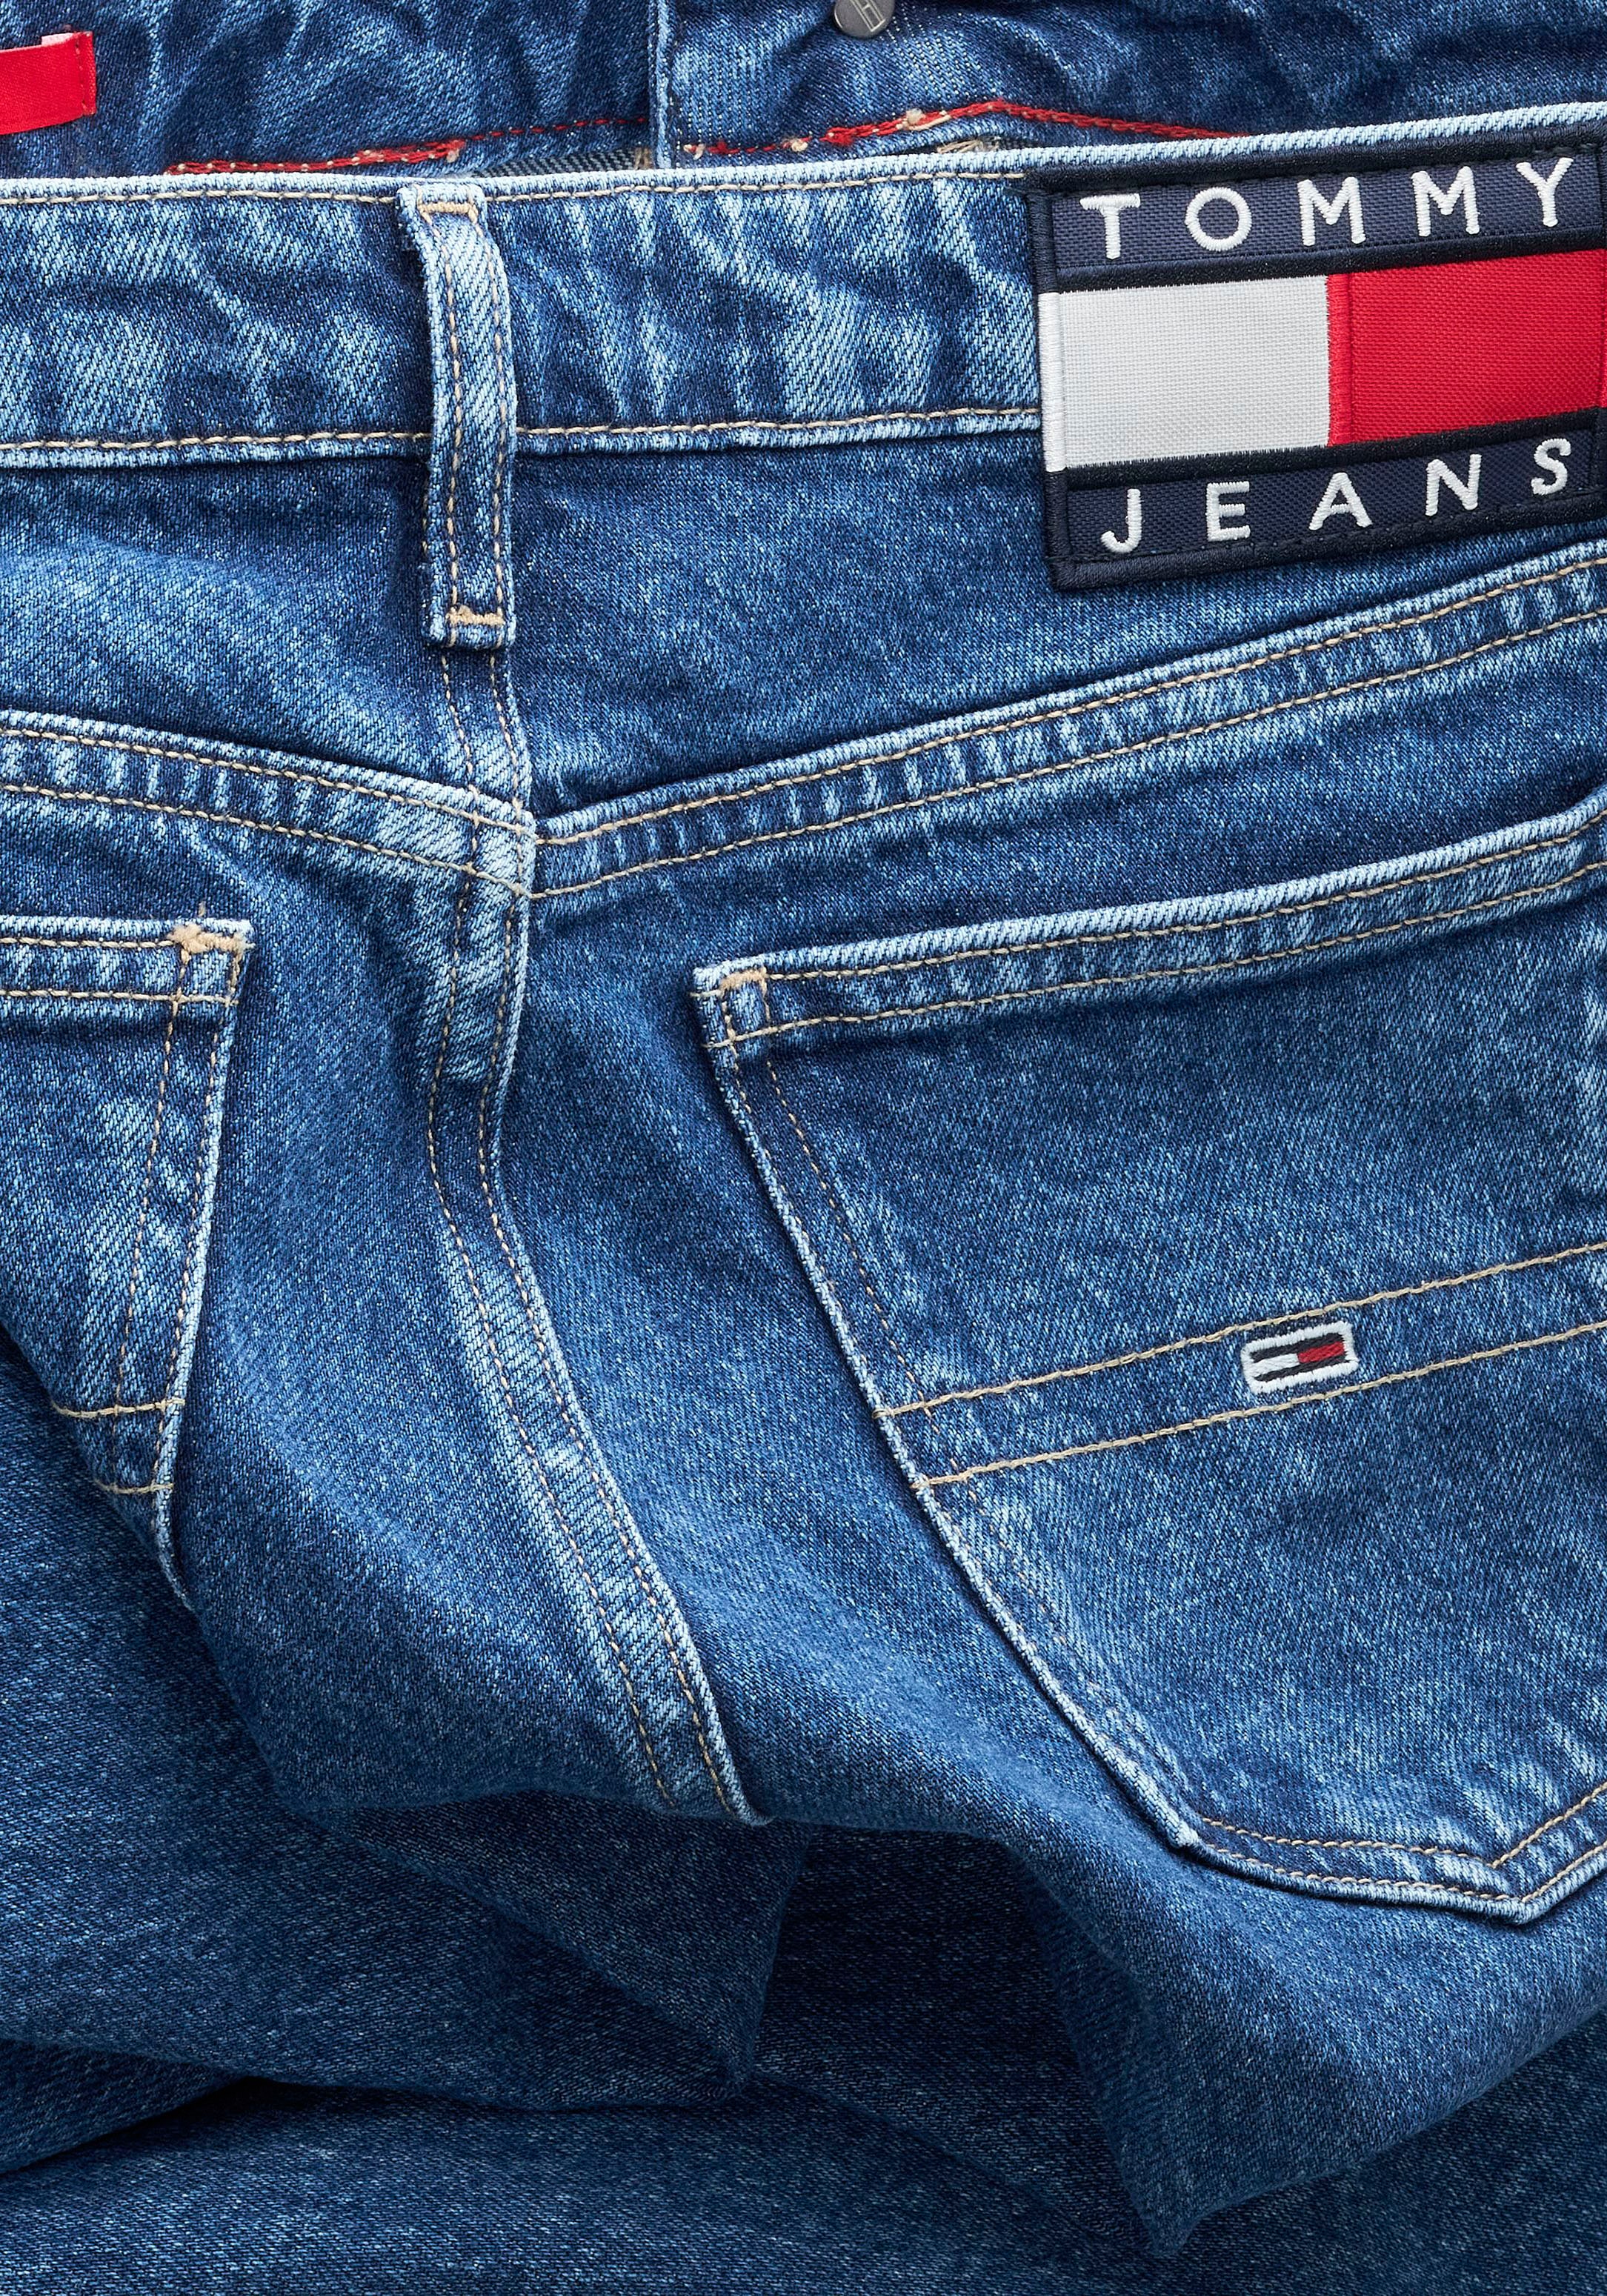 bei Schlagjeans, Jeans Tommy Logobadge ♕ Tommy mit Jeans